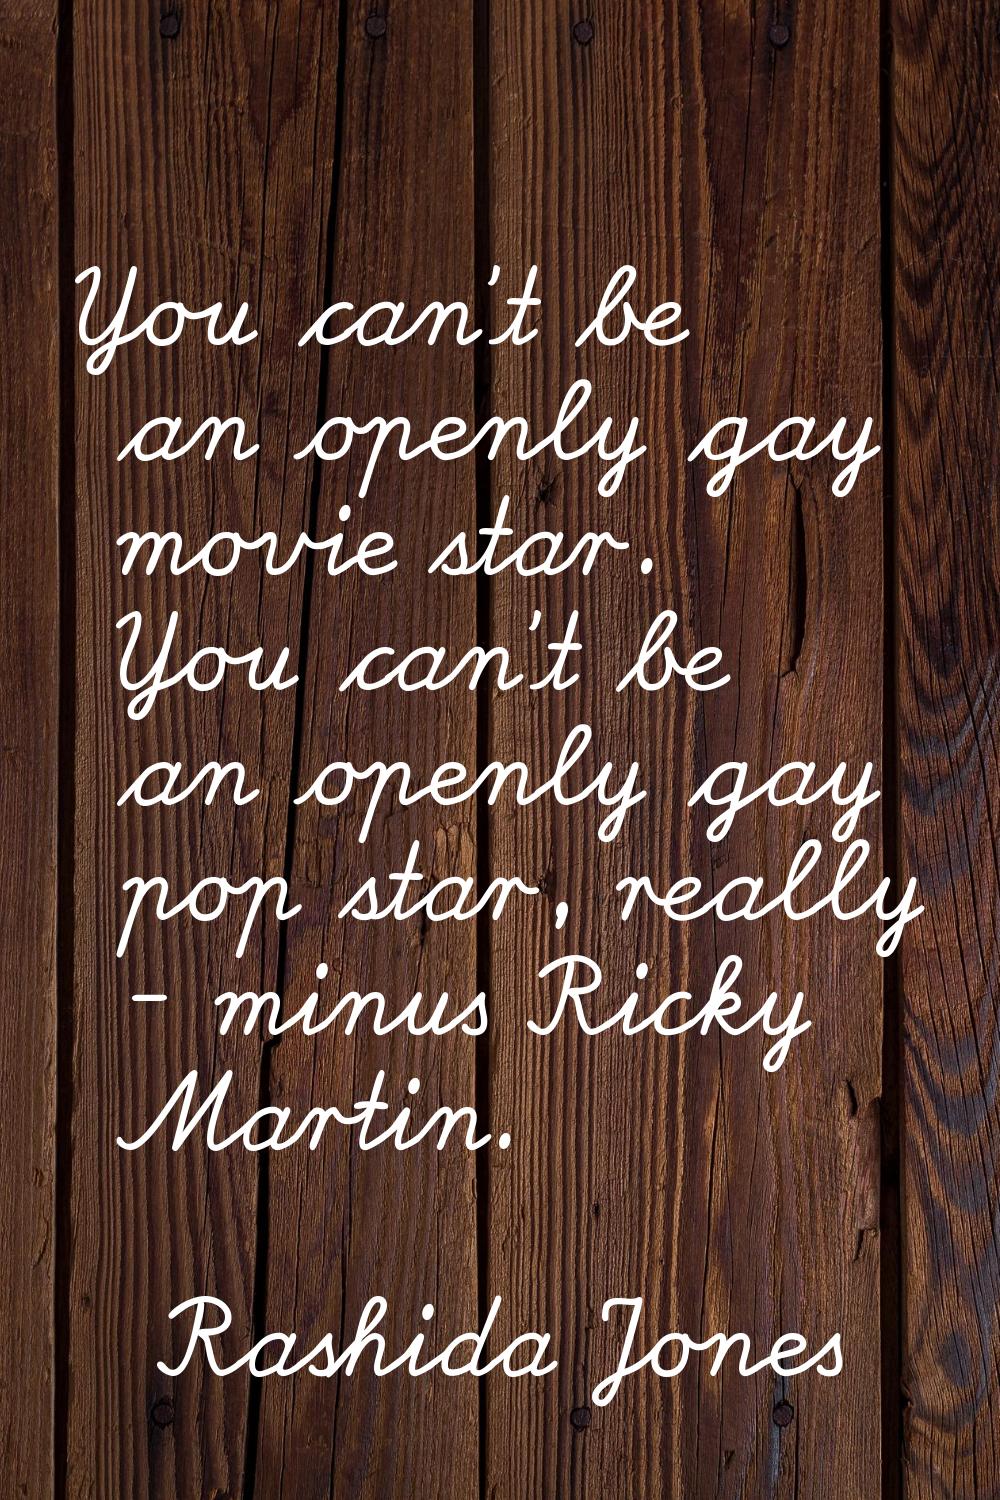 You can't be an openly gay movie star. You can't be an openly gay pop star, really - minus Ricky Ma